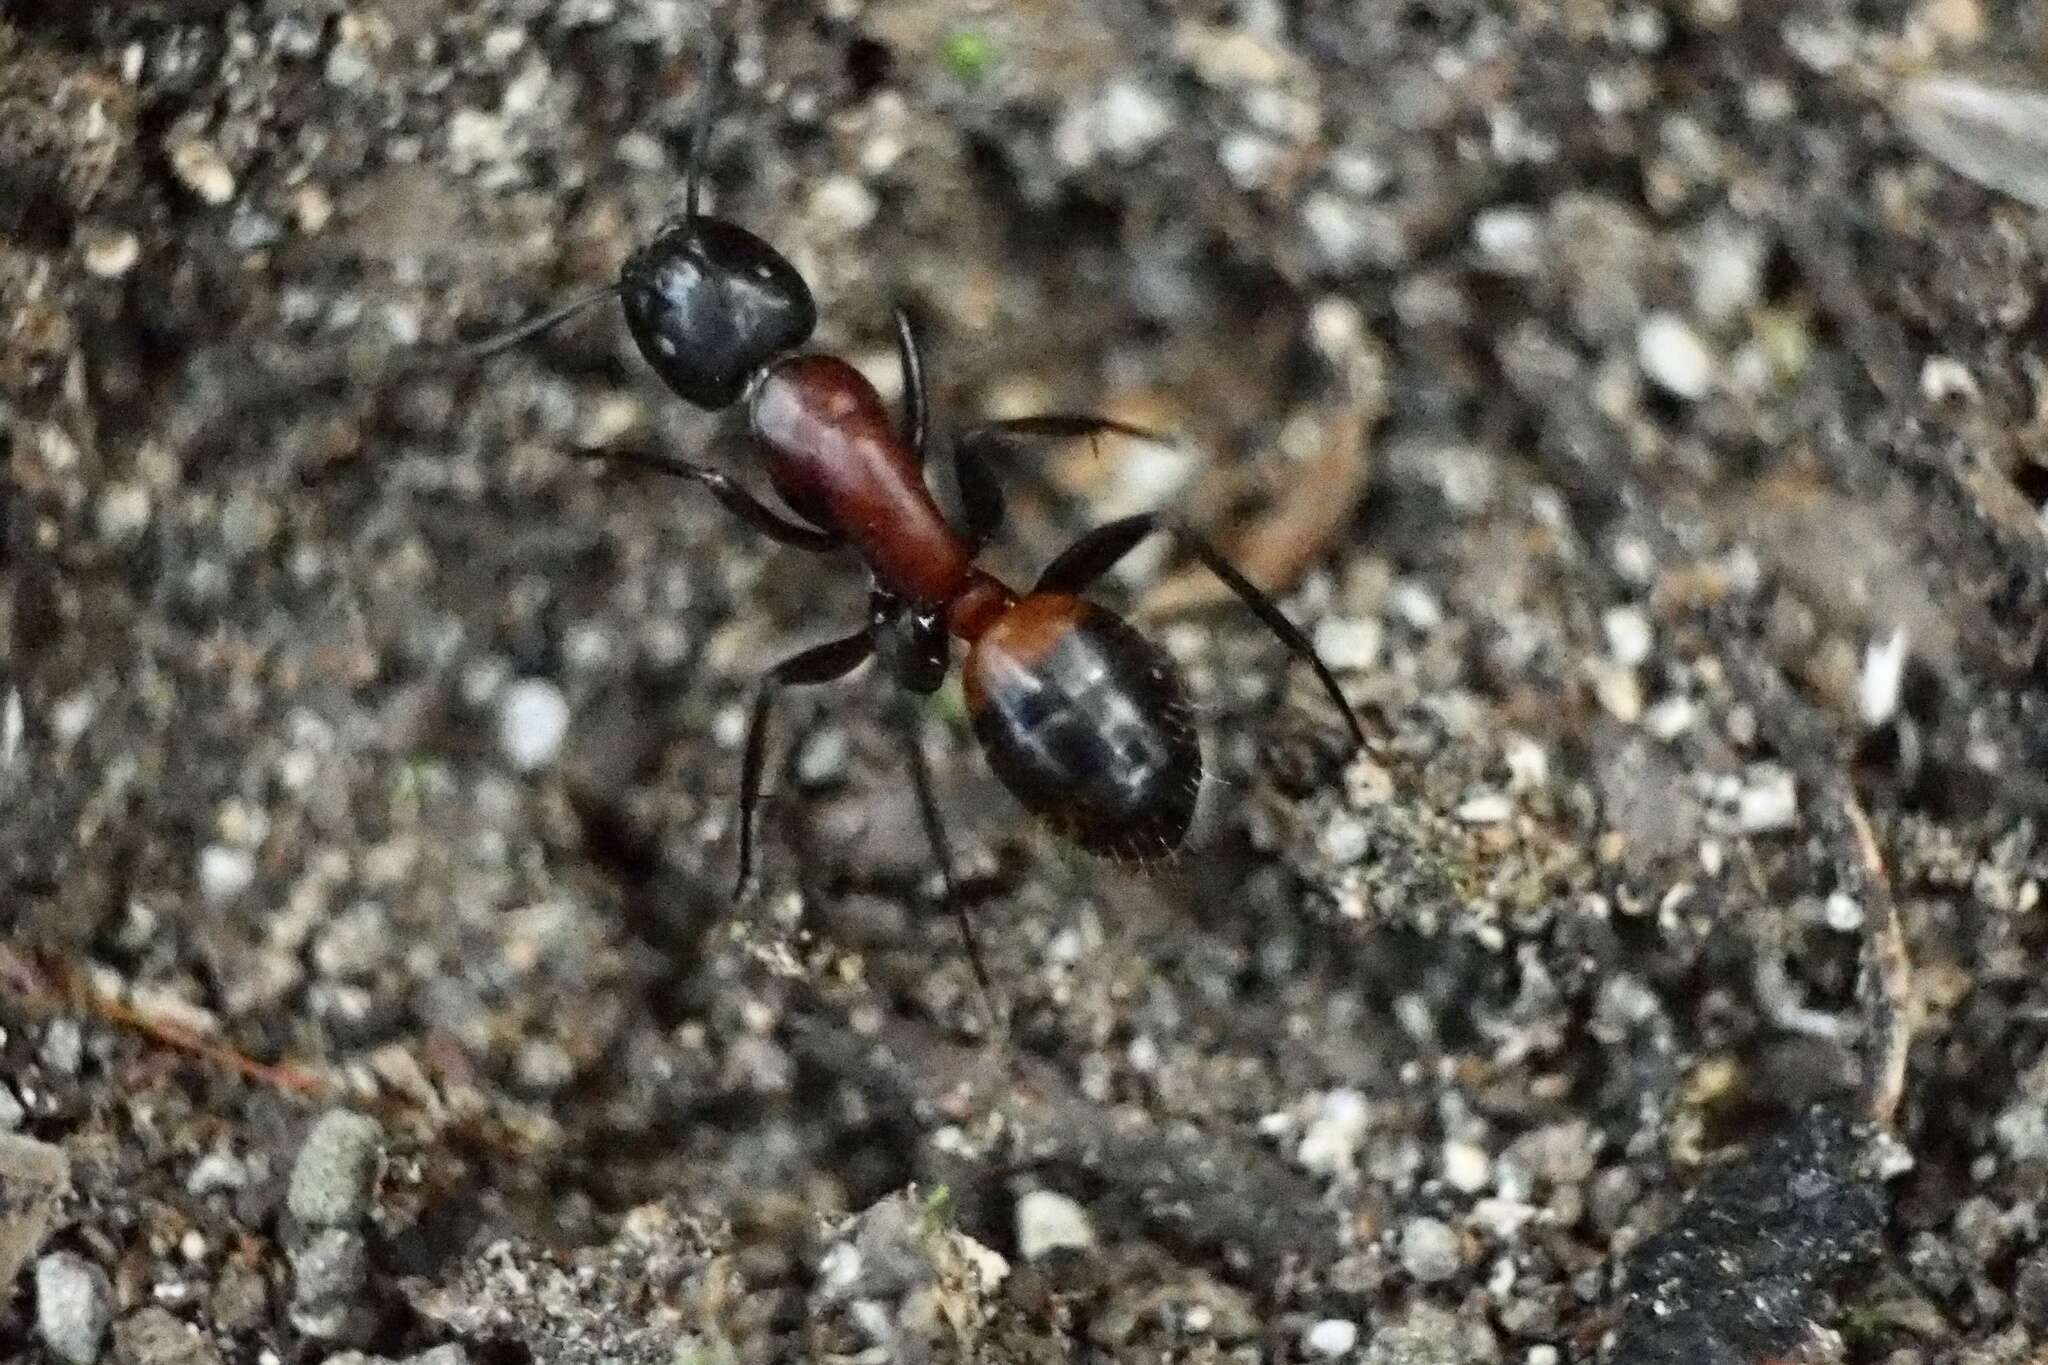 Image of Camponotus obscuripes Mayr 1879